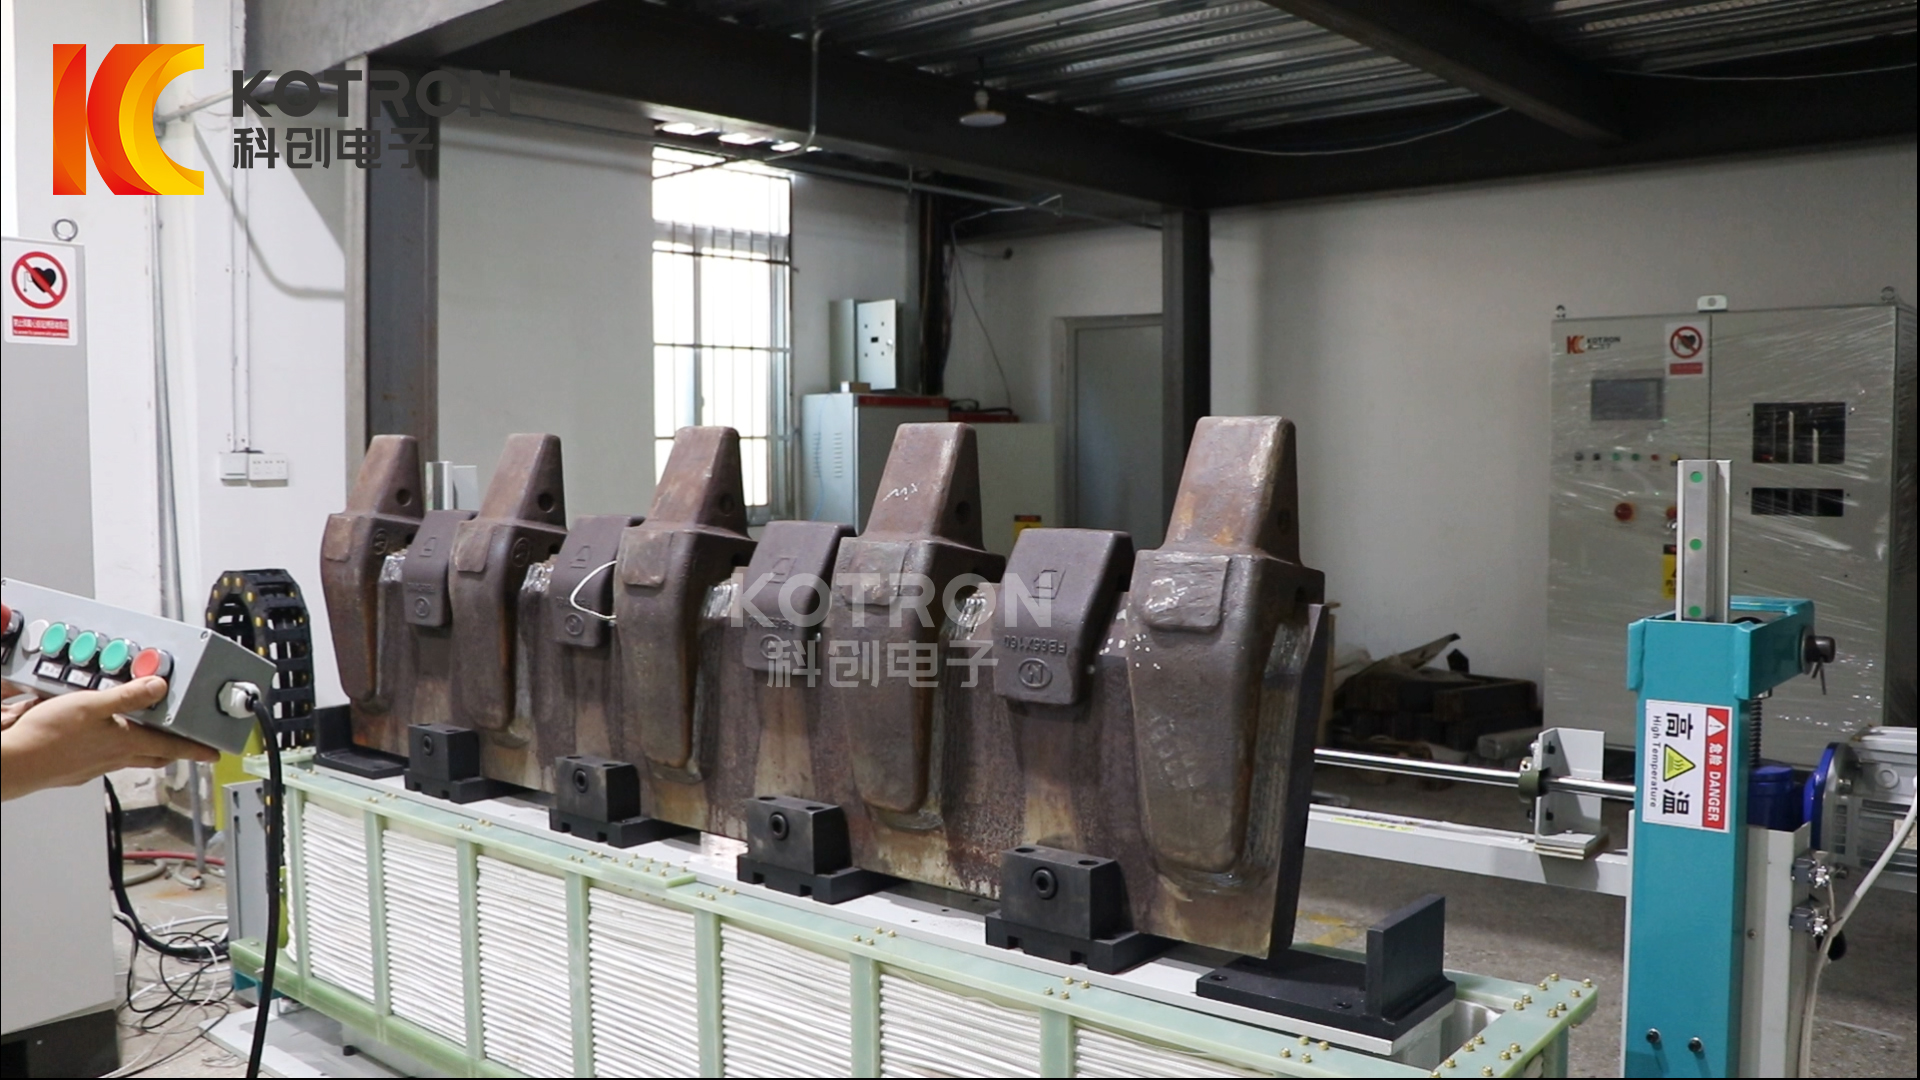 Complete set of Bucket Teeth Plate Induction Heating Machine with induction preheating lift platform